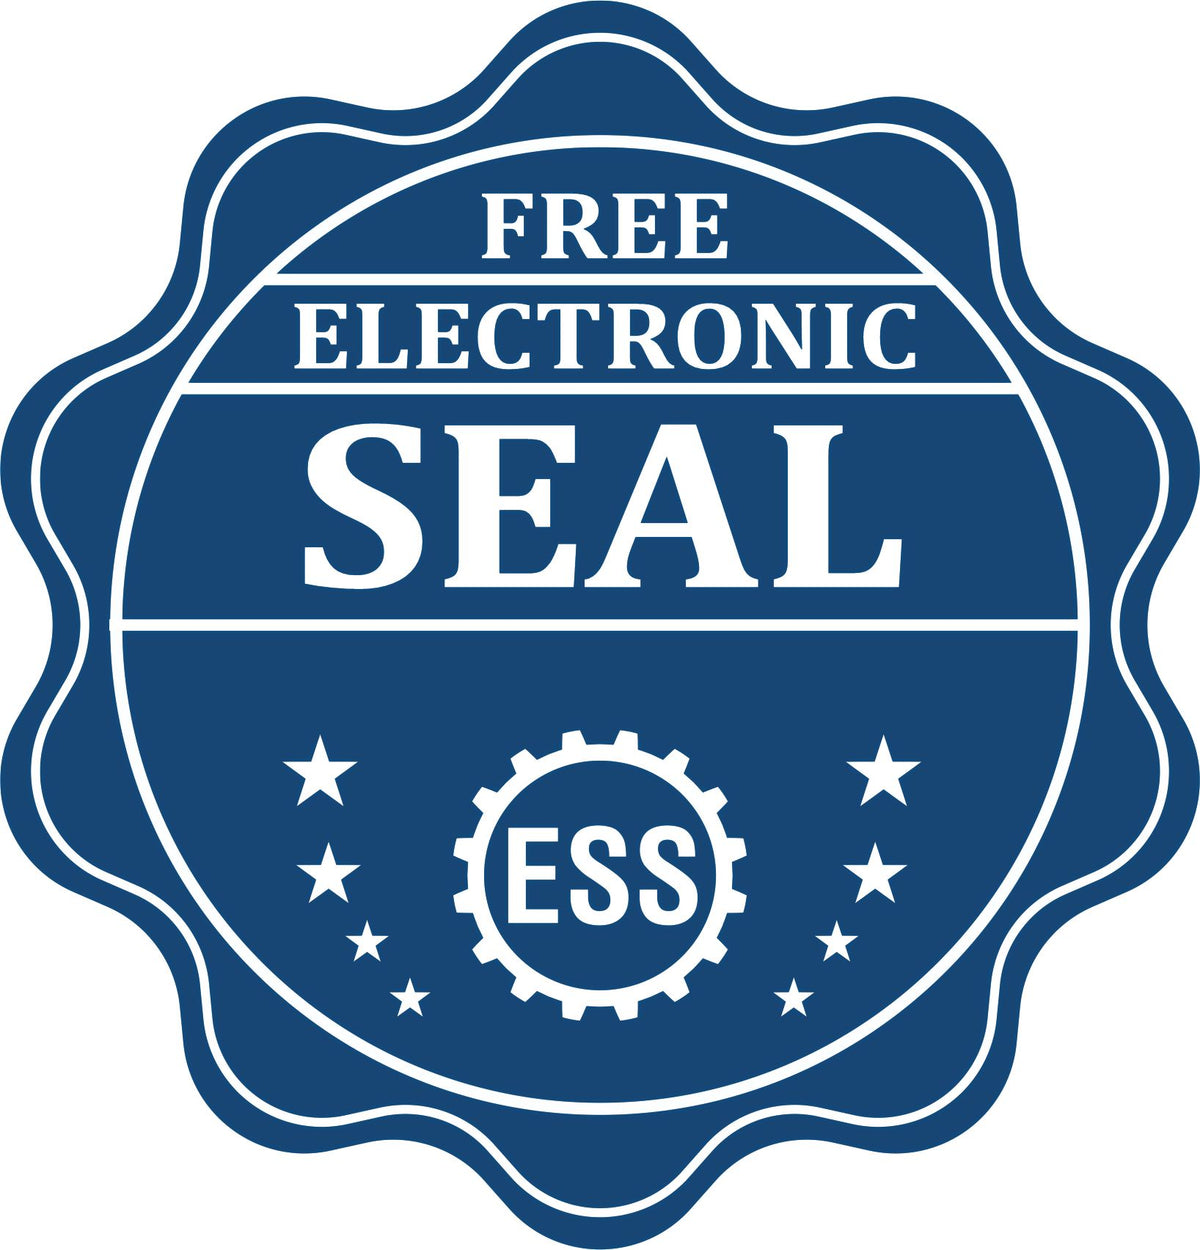 A badge showing a free electronic seal for the State of District of Columbia Extended Long Reach Engineer Seal with stars and the ESS gear on the emblem.